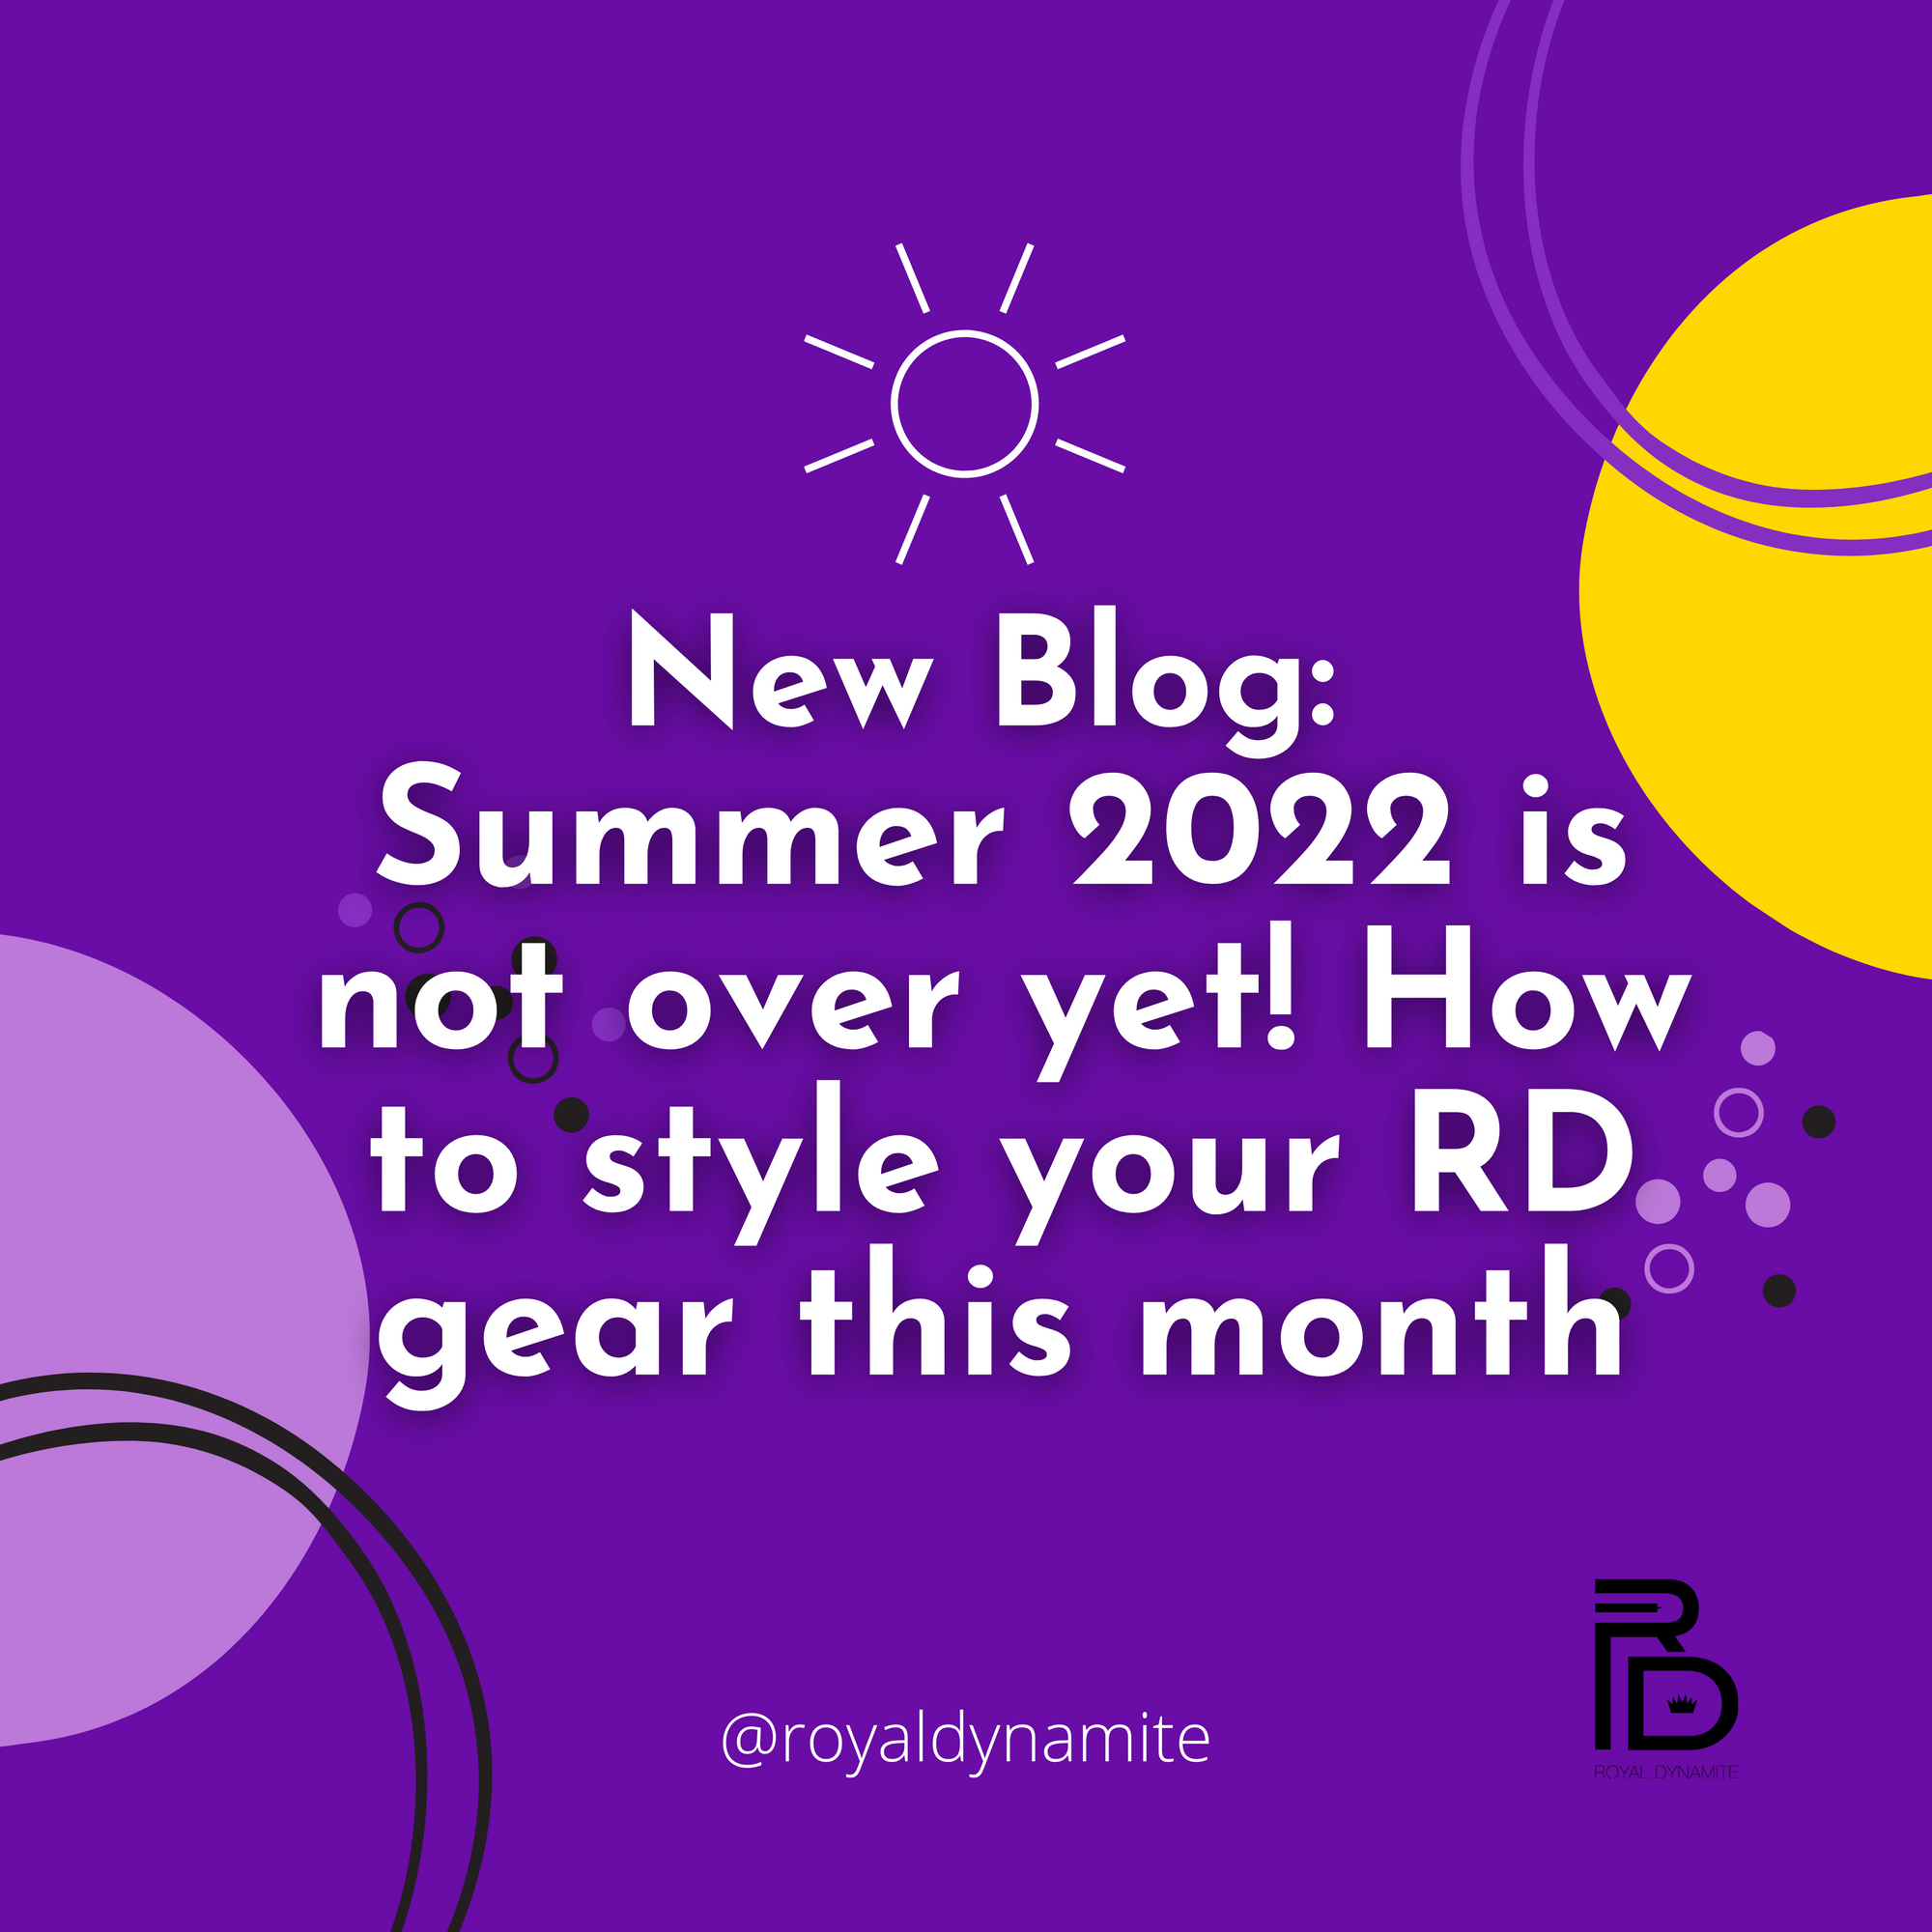 Summer 2022 is not over yet!  How to style your RD gear this month